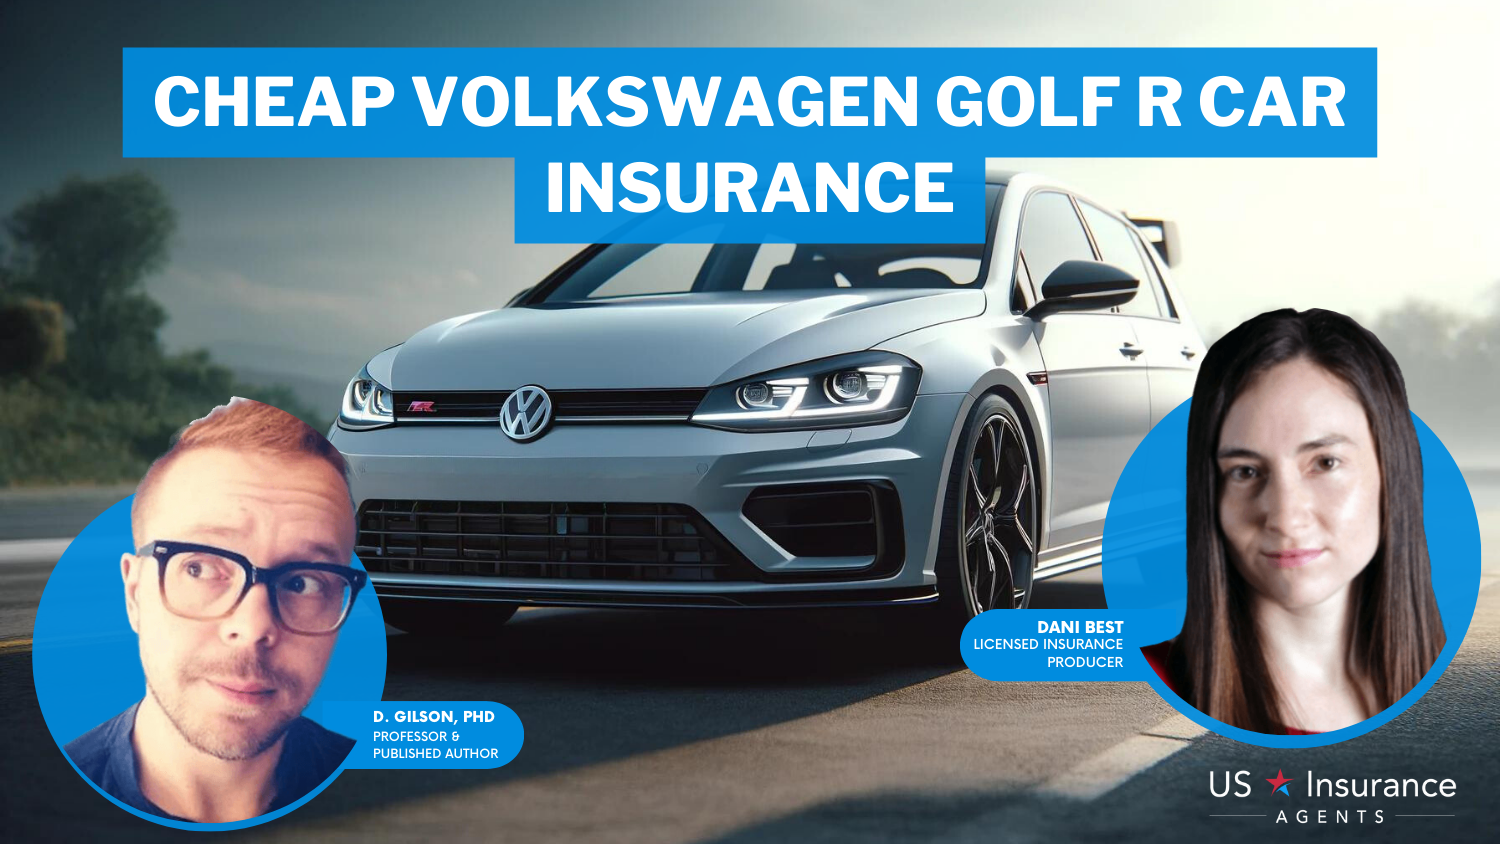 Cheap Volkswagen Golf R Car Insurance: Travelers, State Farm, and Nationwide